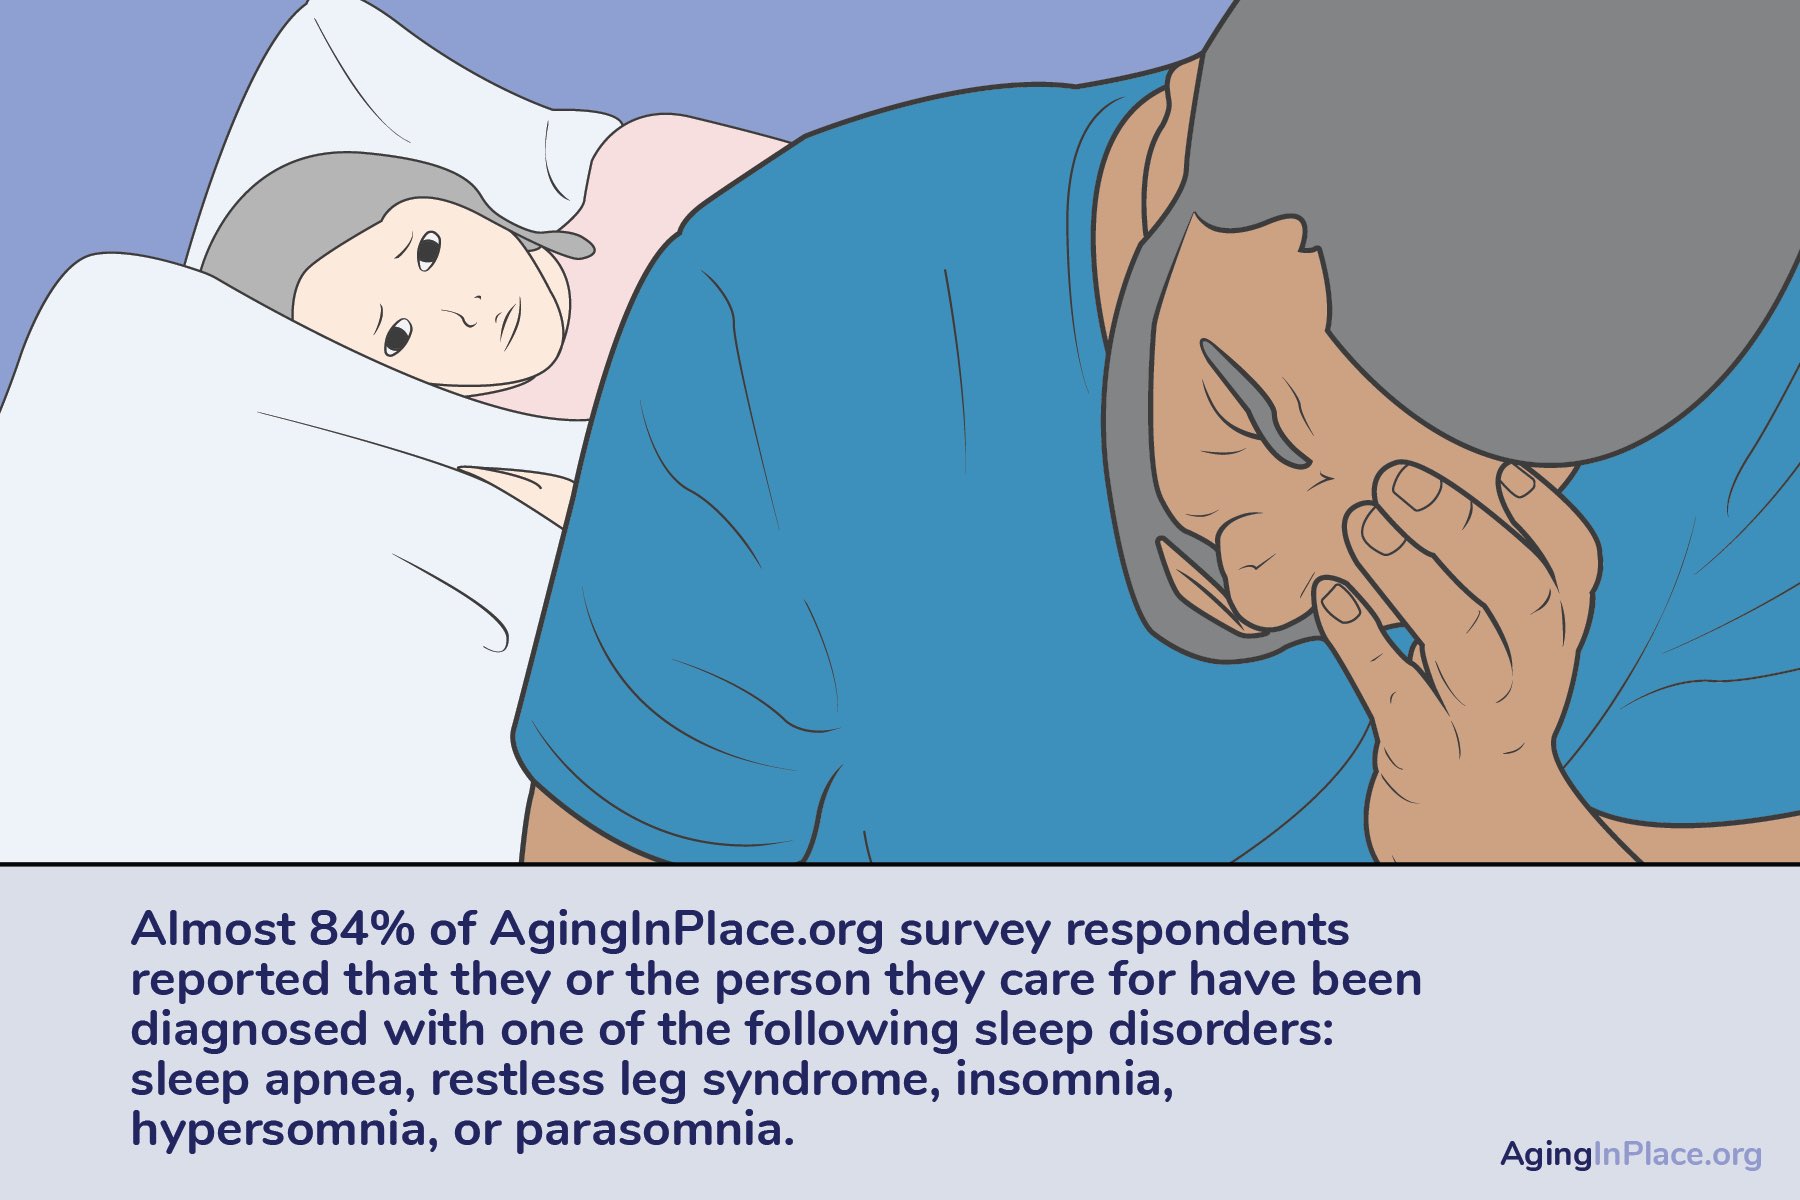 Almost 84% of the respondents (Aginginplace.org survey) reported that or the person they care have been diagnosed with sleep disorders